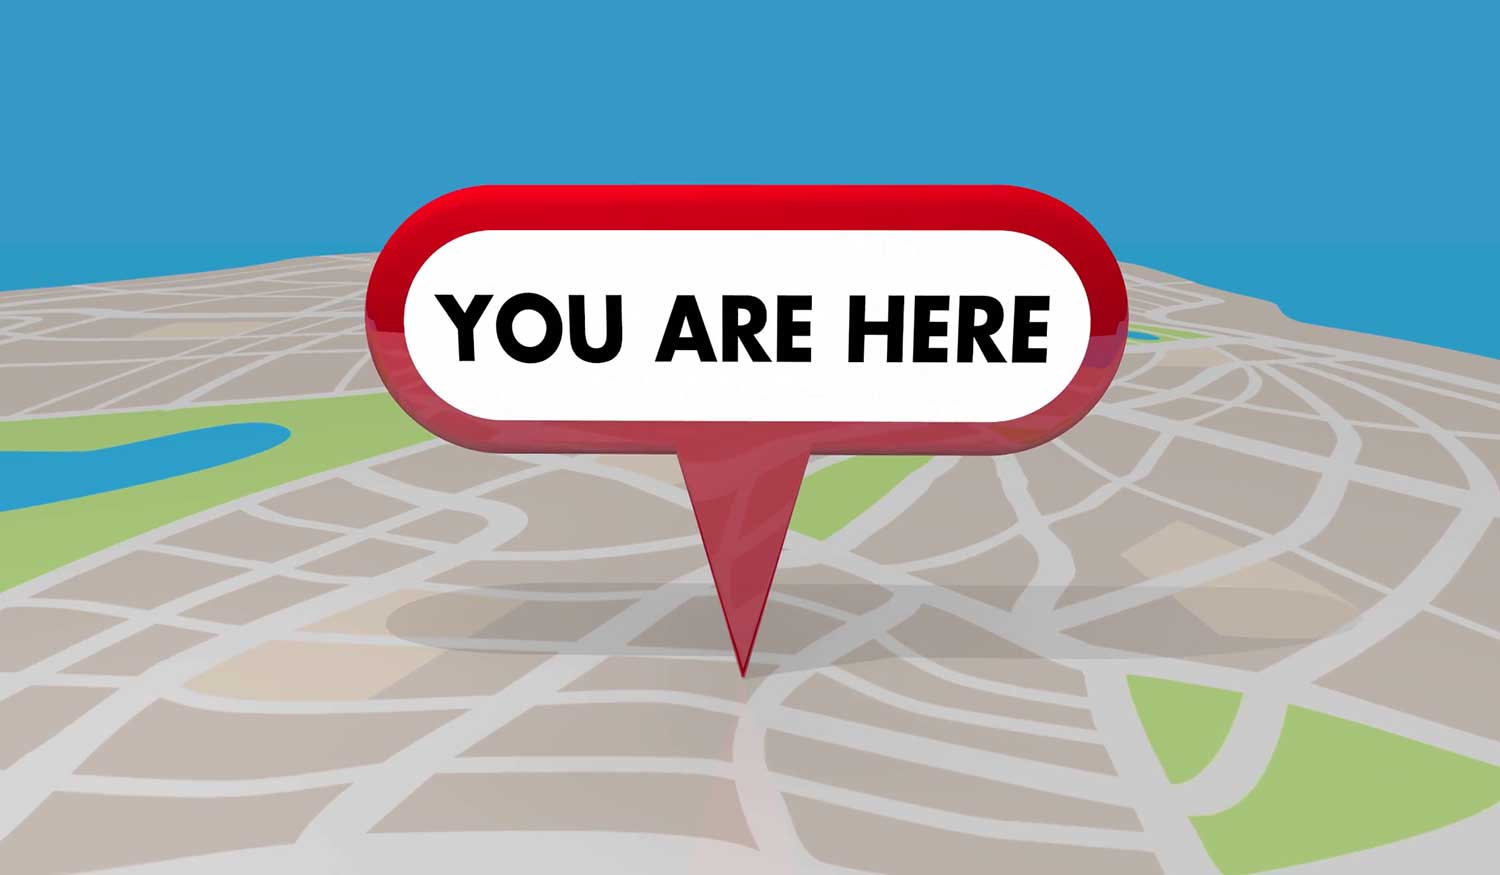 "You Are Here" signs help us orient ourselves in unfamiliar territory. We often need direction too in our spiritual lives, but are we looking in the right place?